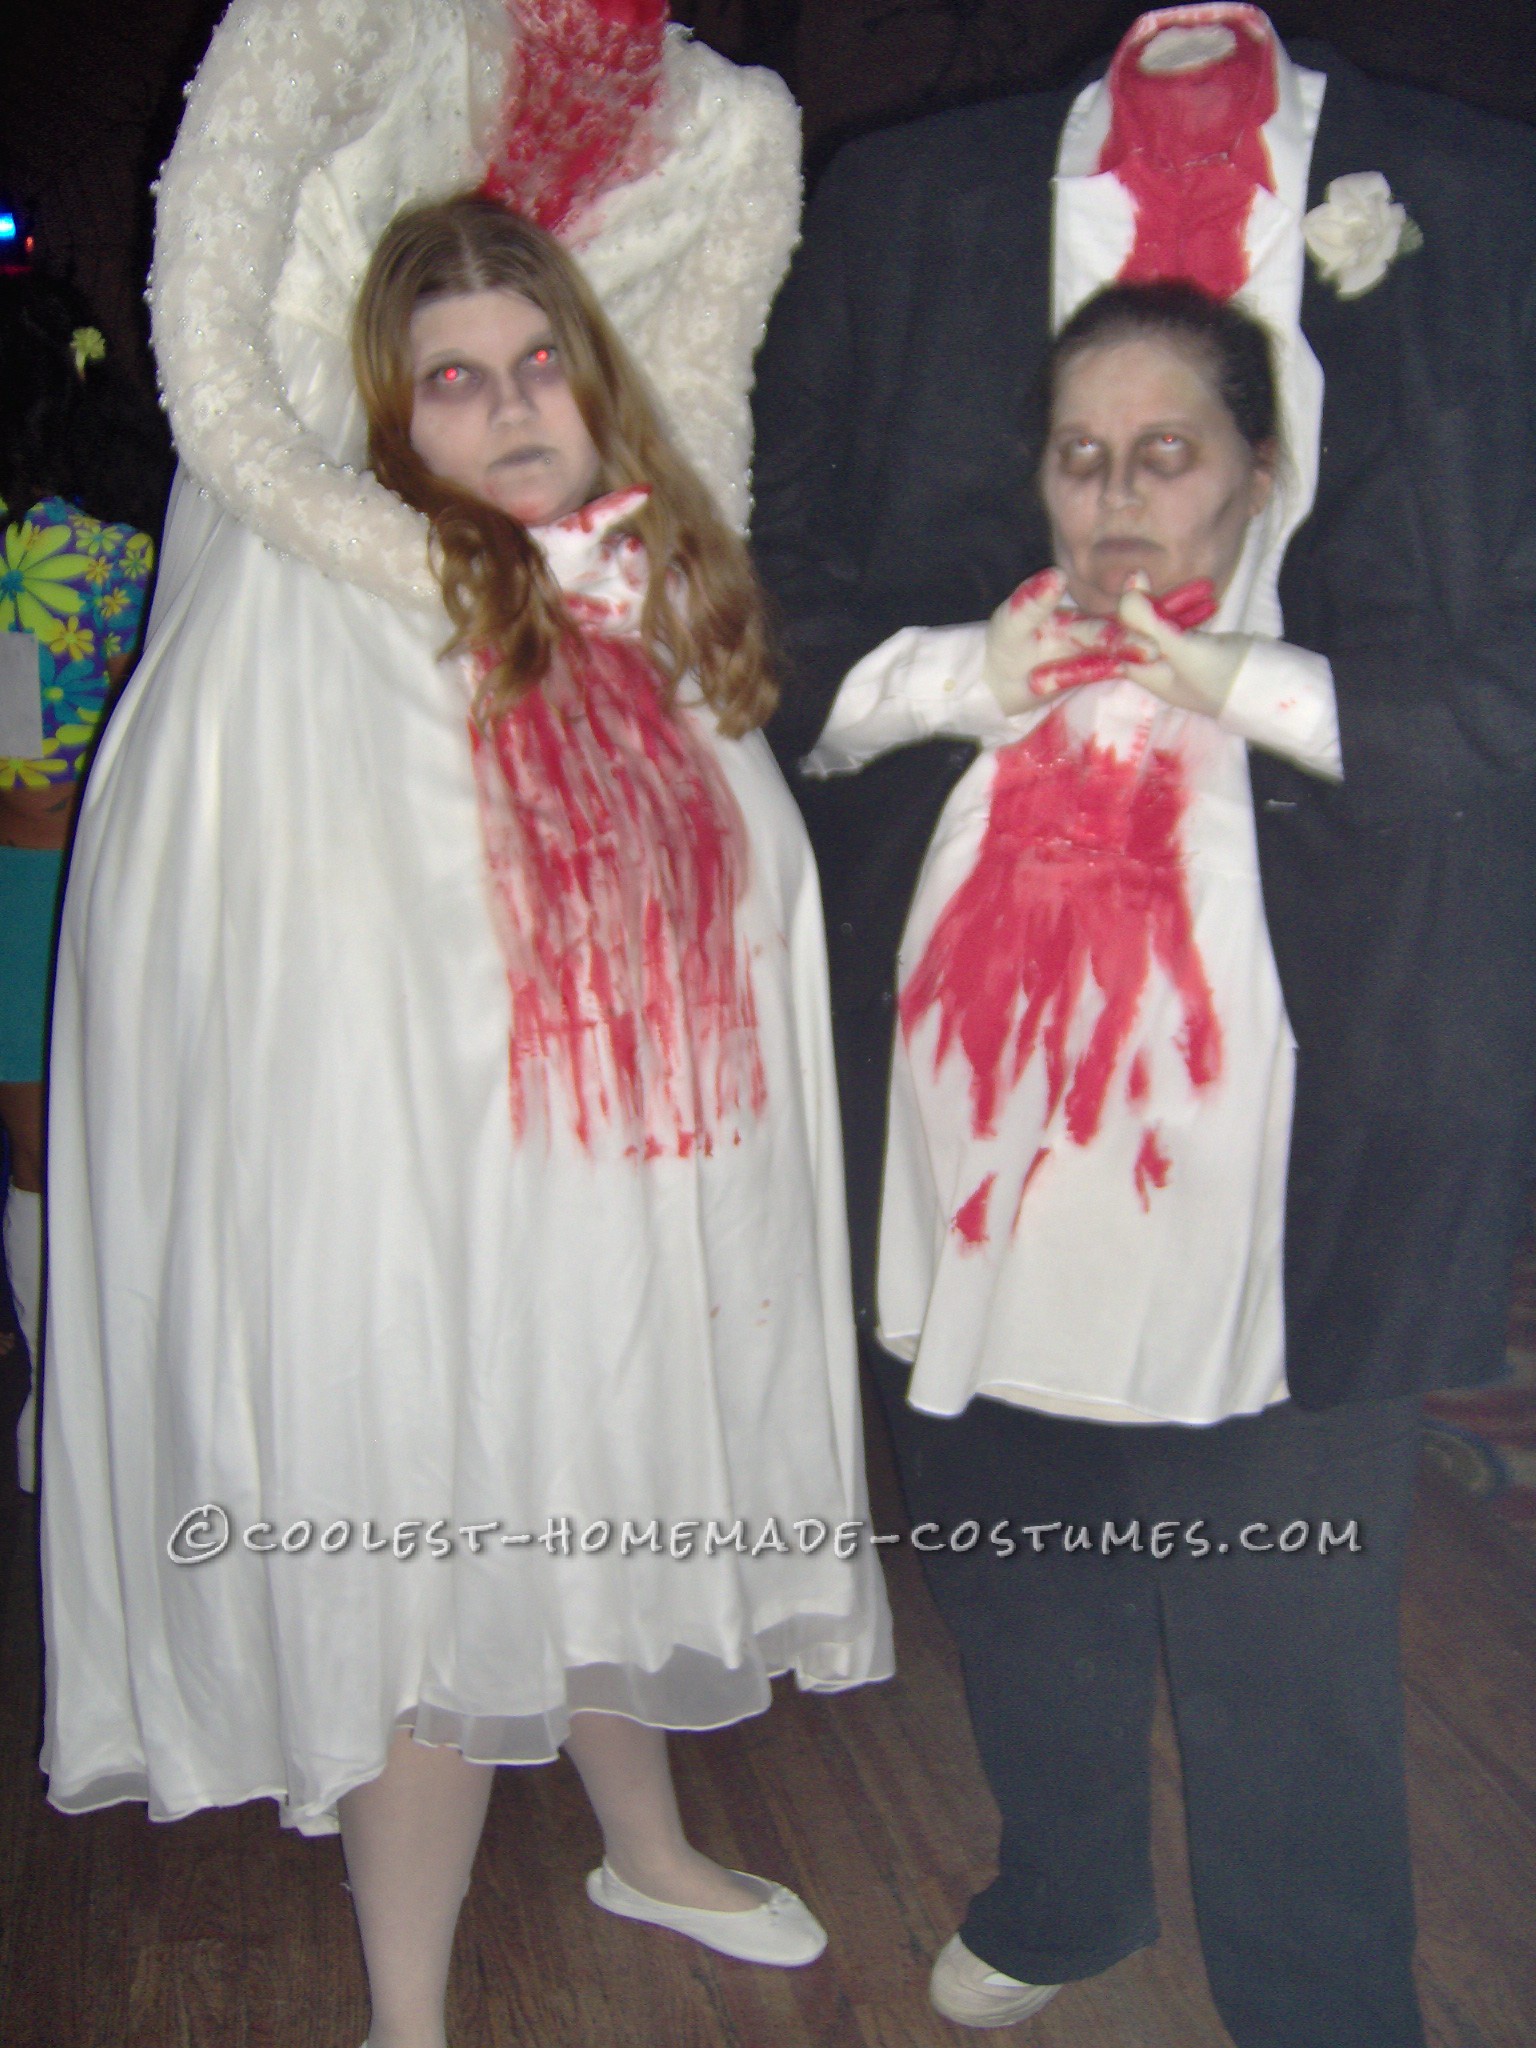 Thrift Store Headless Bride and Groom Couple Costume